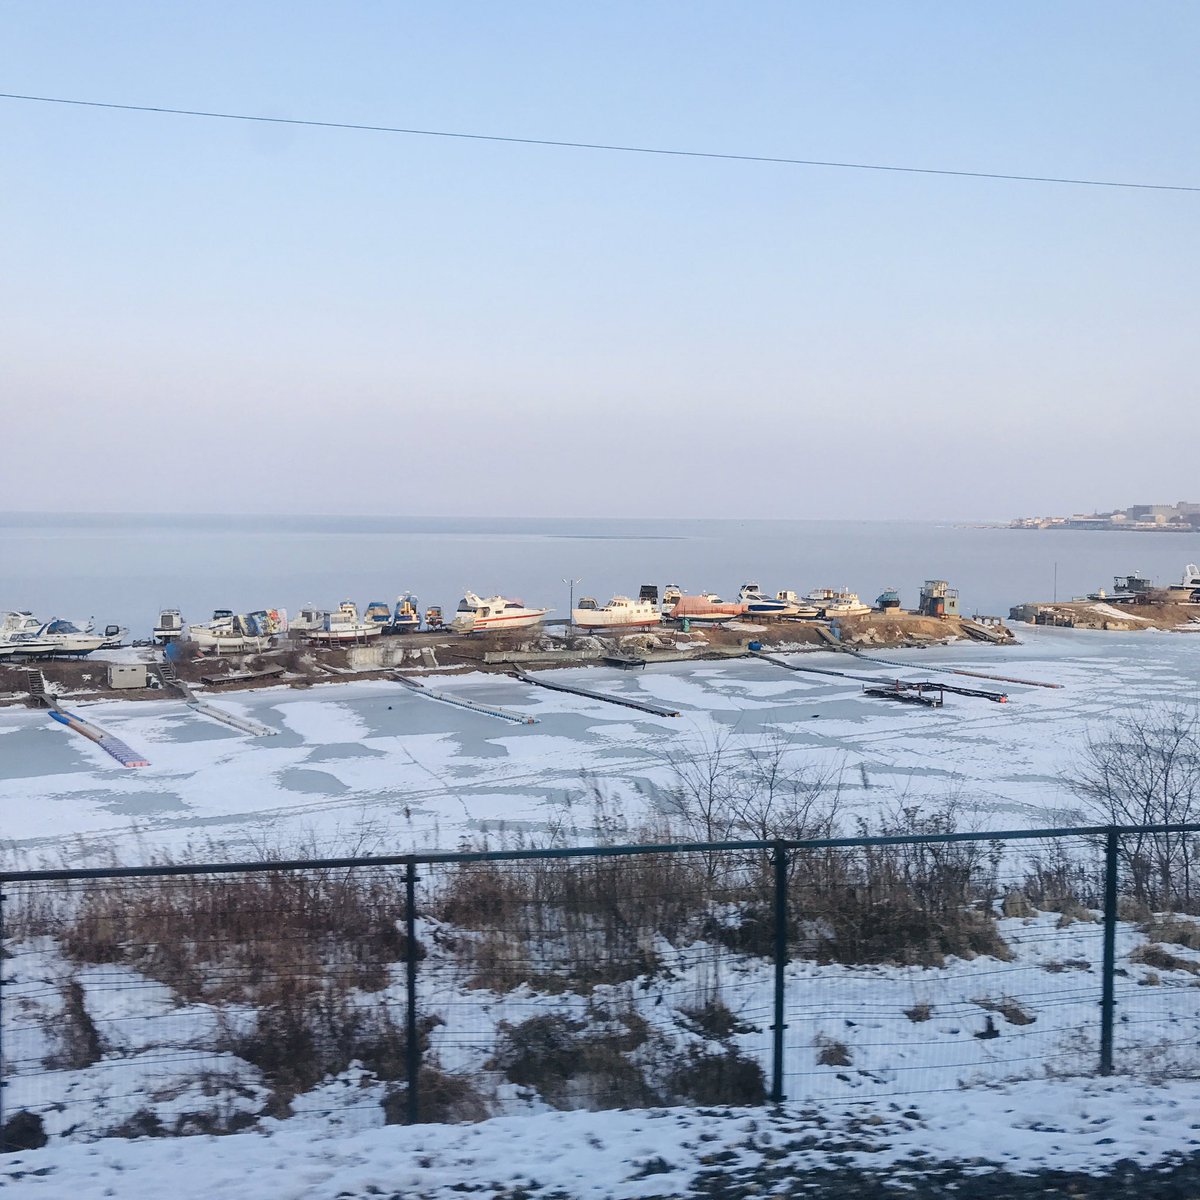 Incredible ice fishing and driving SUVs on the bay outside of Vladivostok. I’m already at the airport waiting for my 9 hour flight back to Moscow.